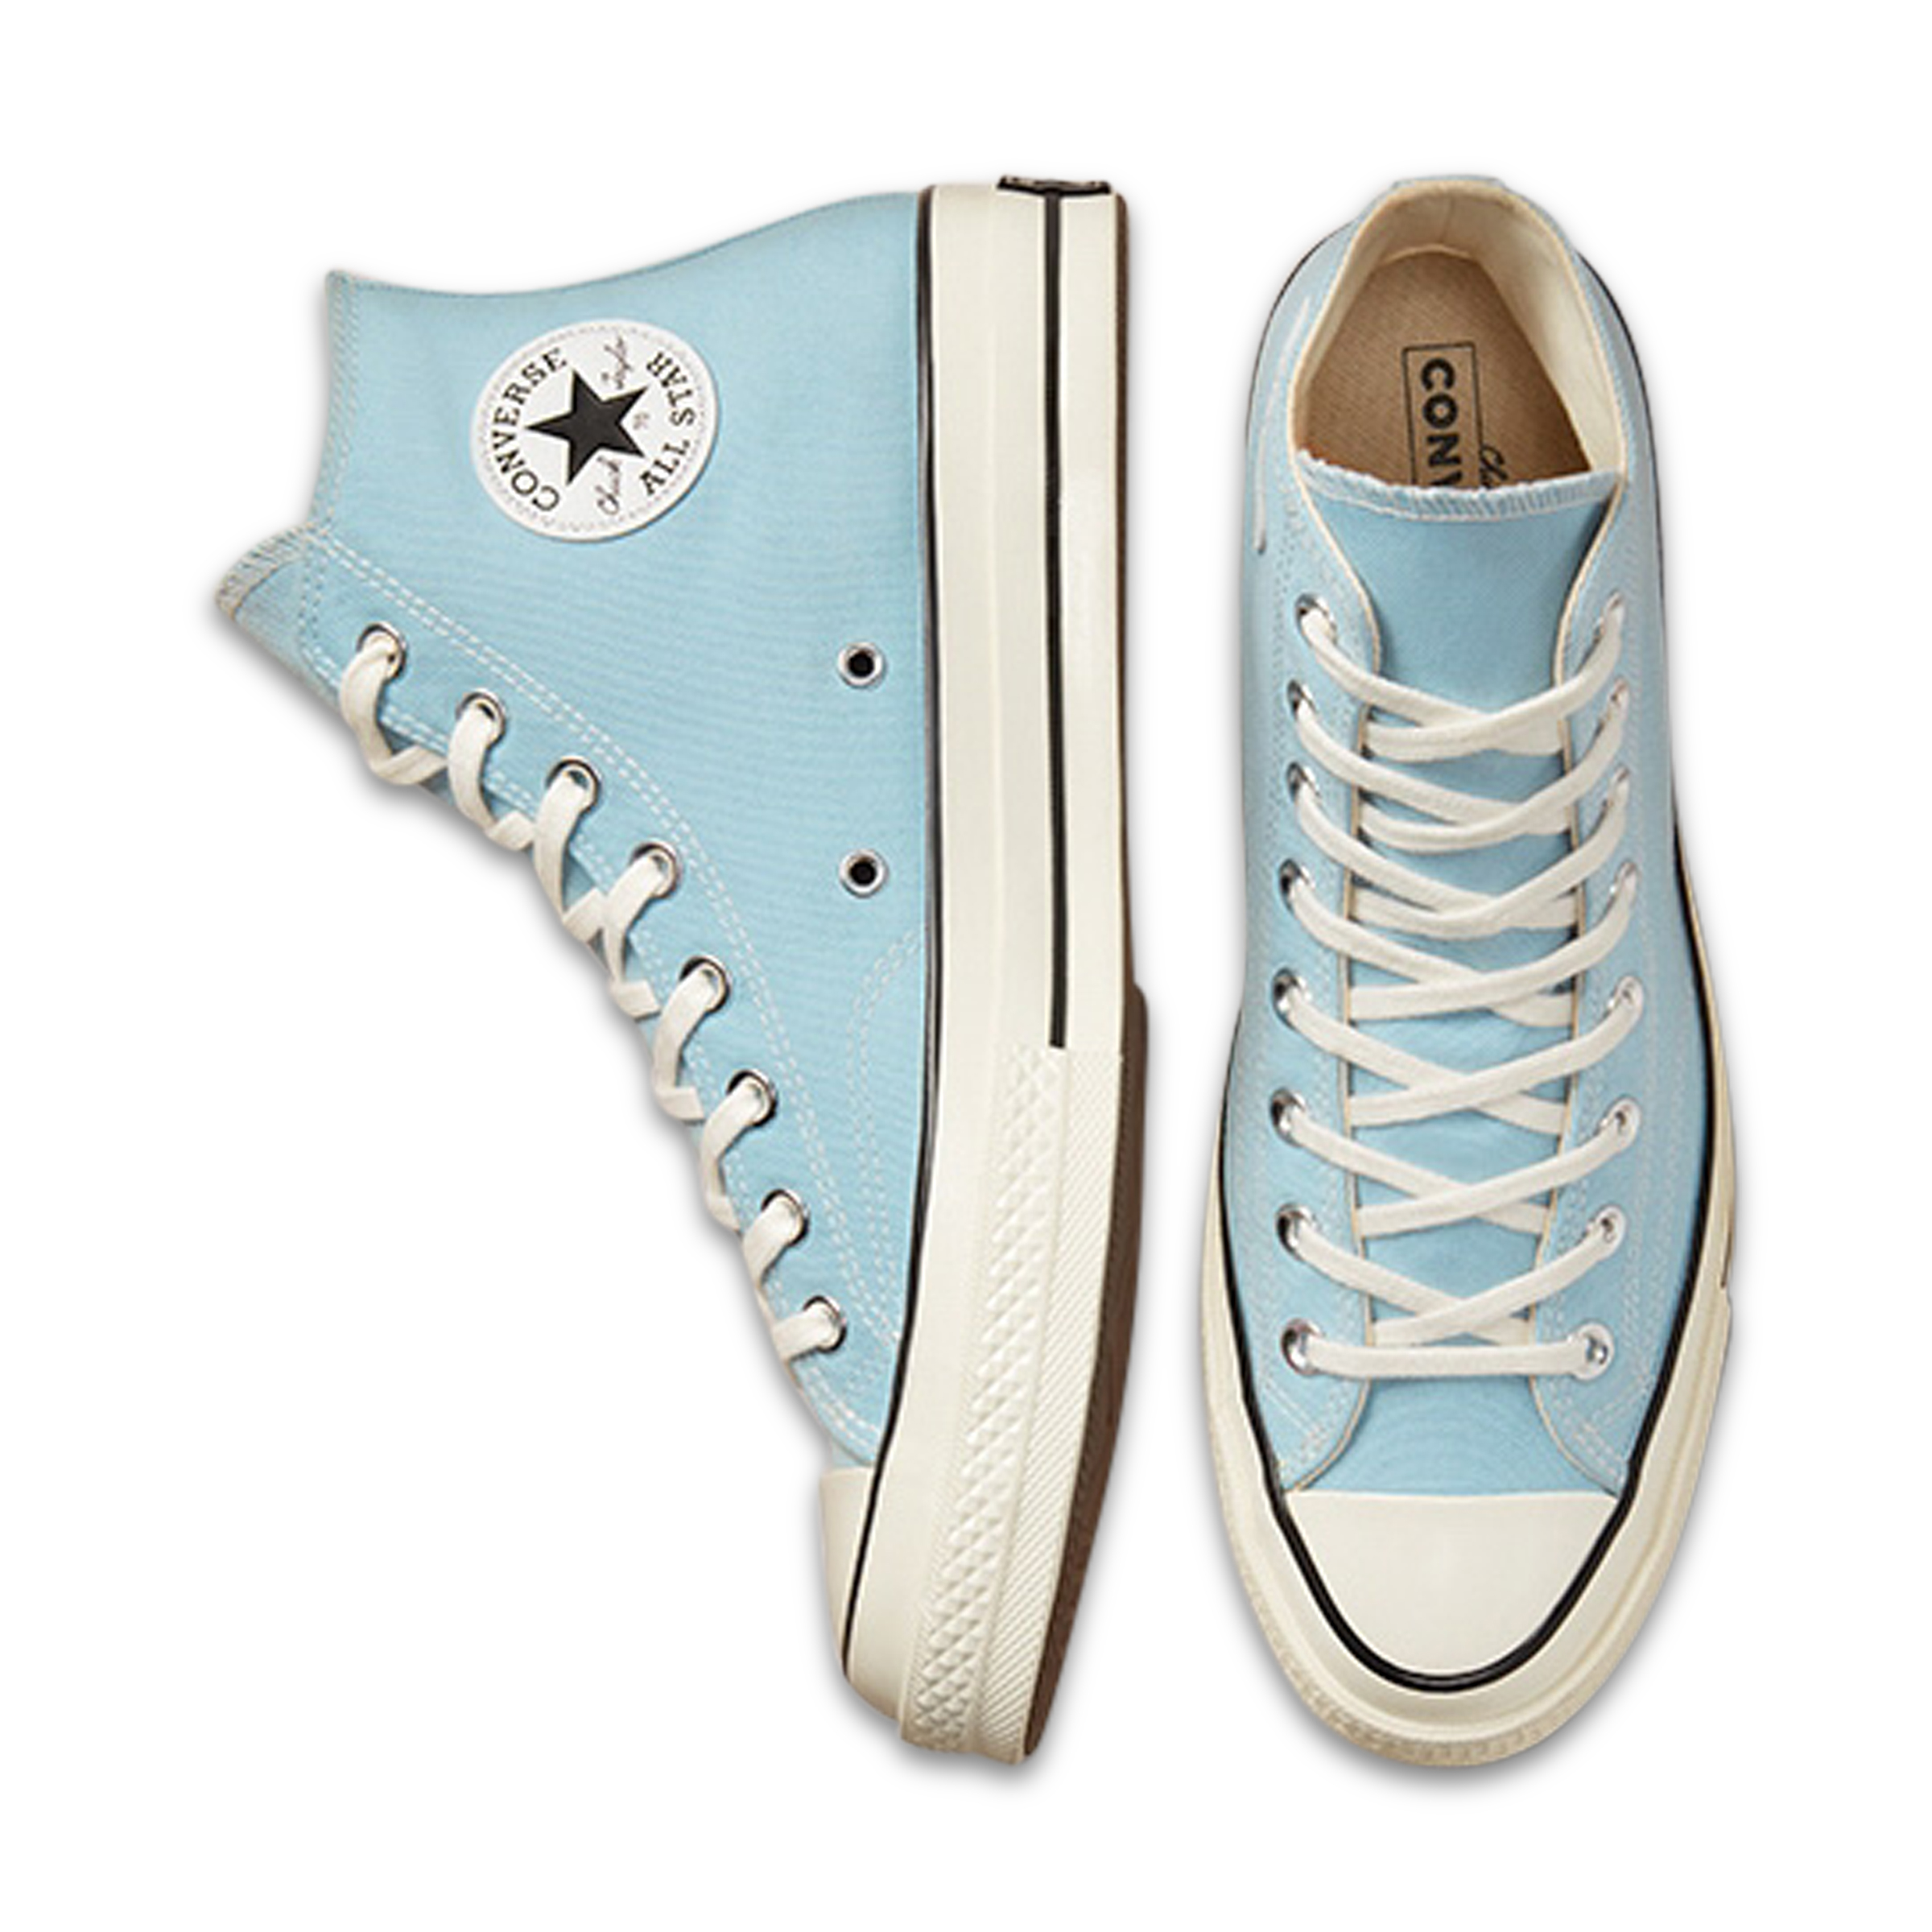 Converse Chuck 70 High Recycled Canvas Light Armory Blue/Egret/Black | Hype  DC